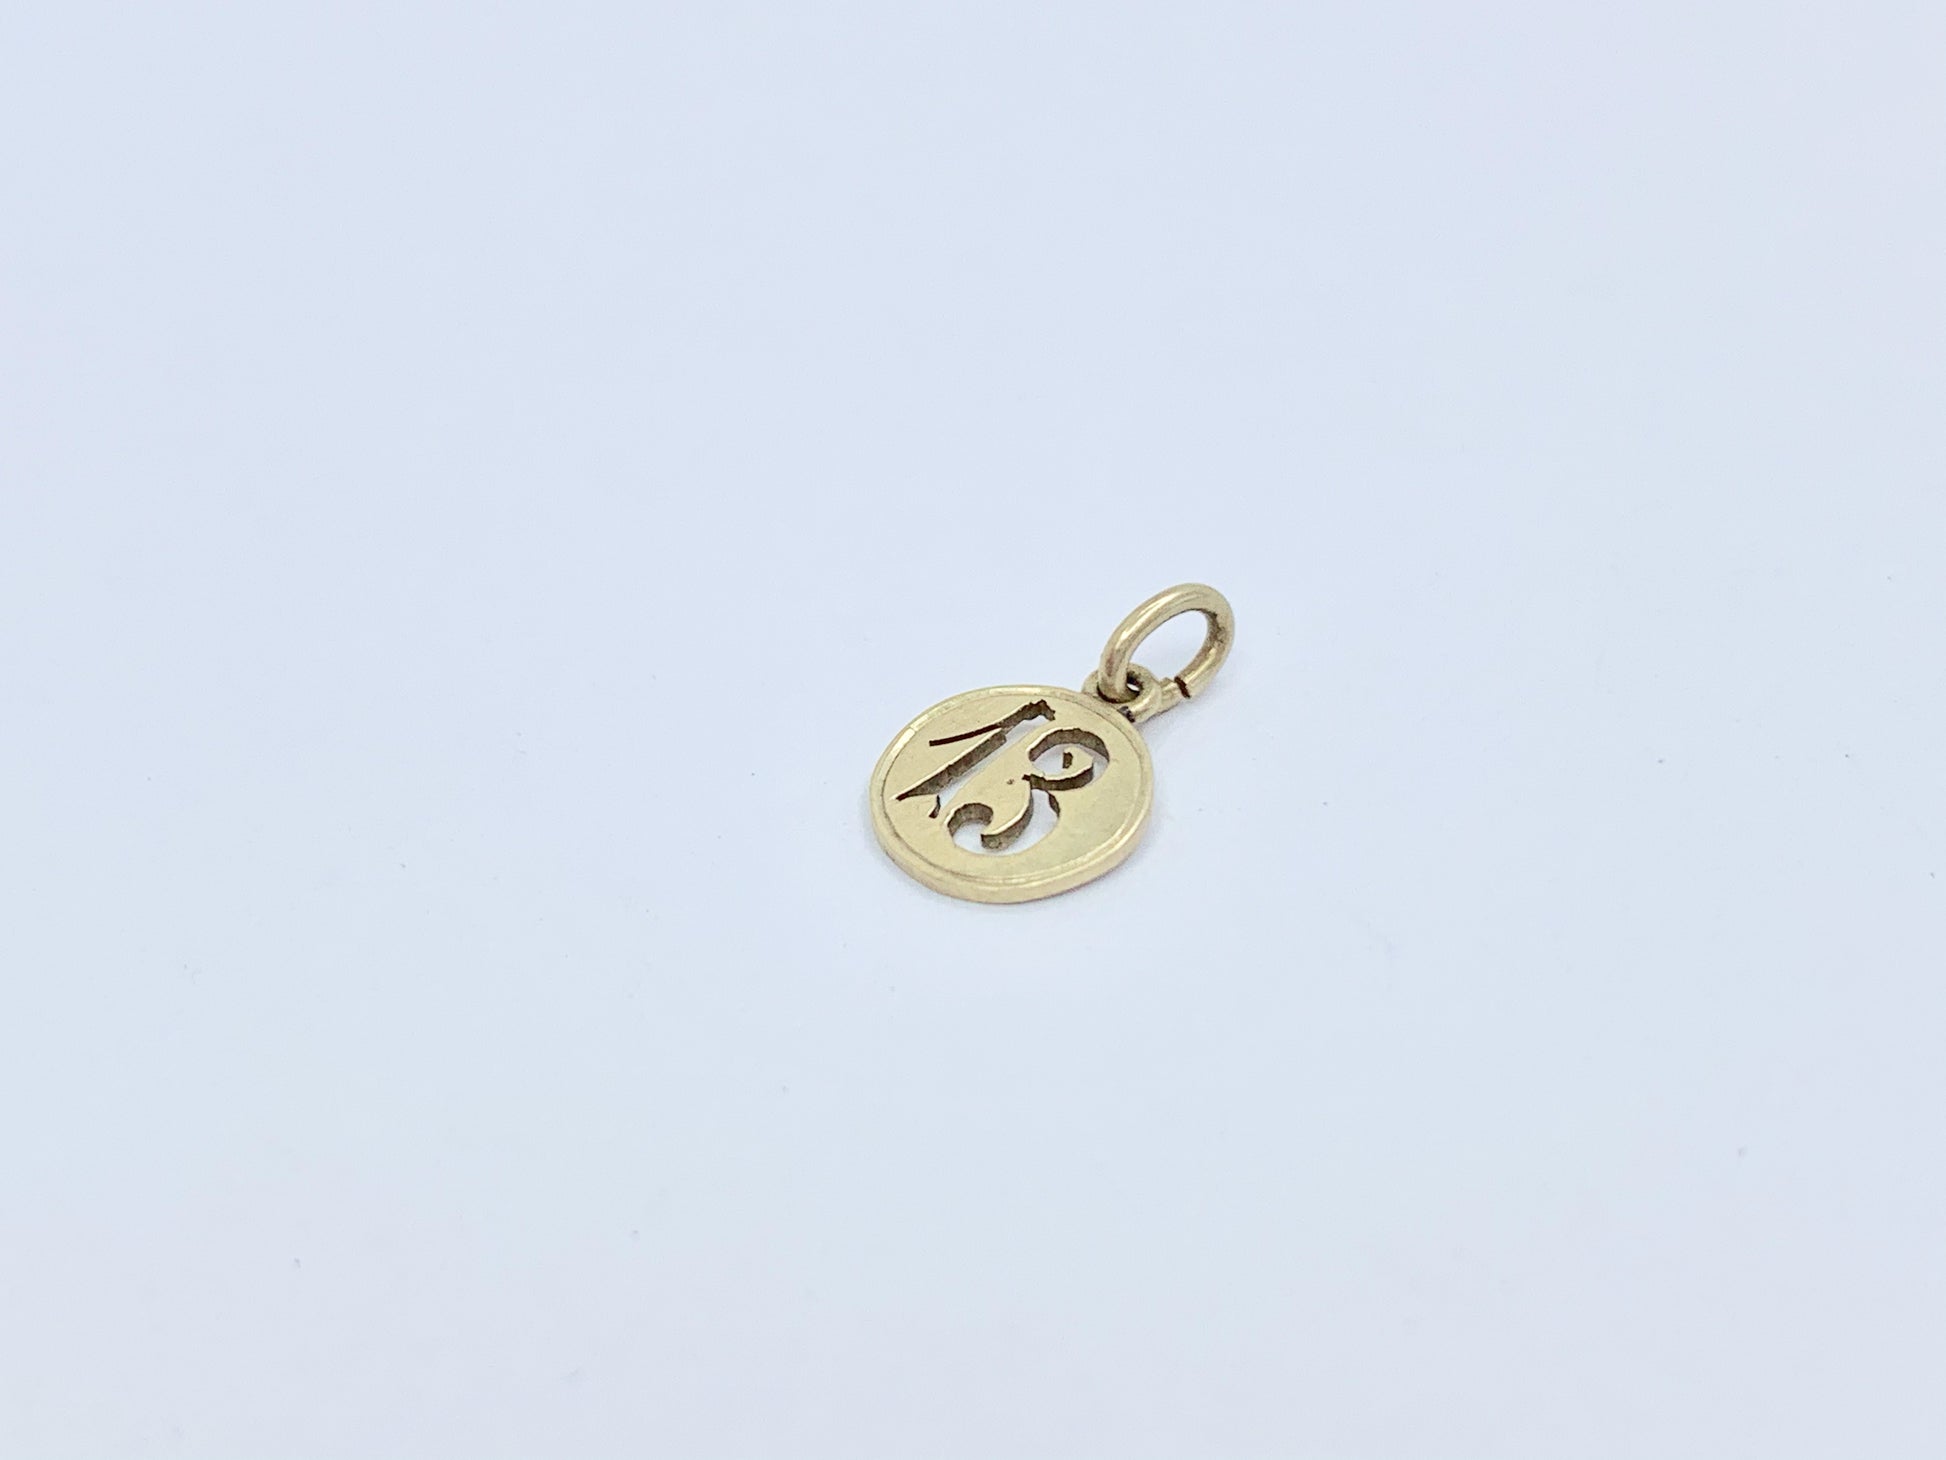 9ct-gold-lucky-13-charm